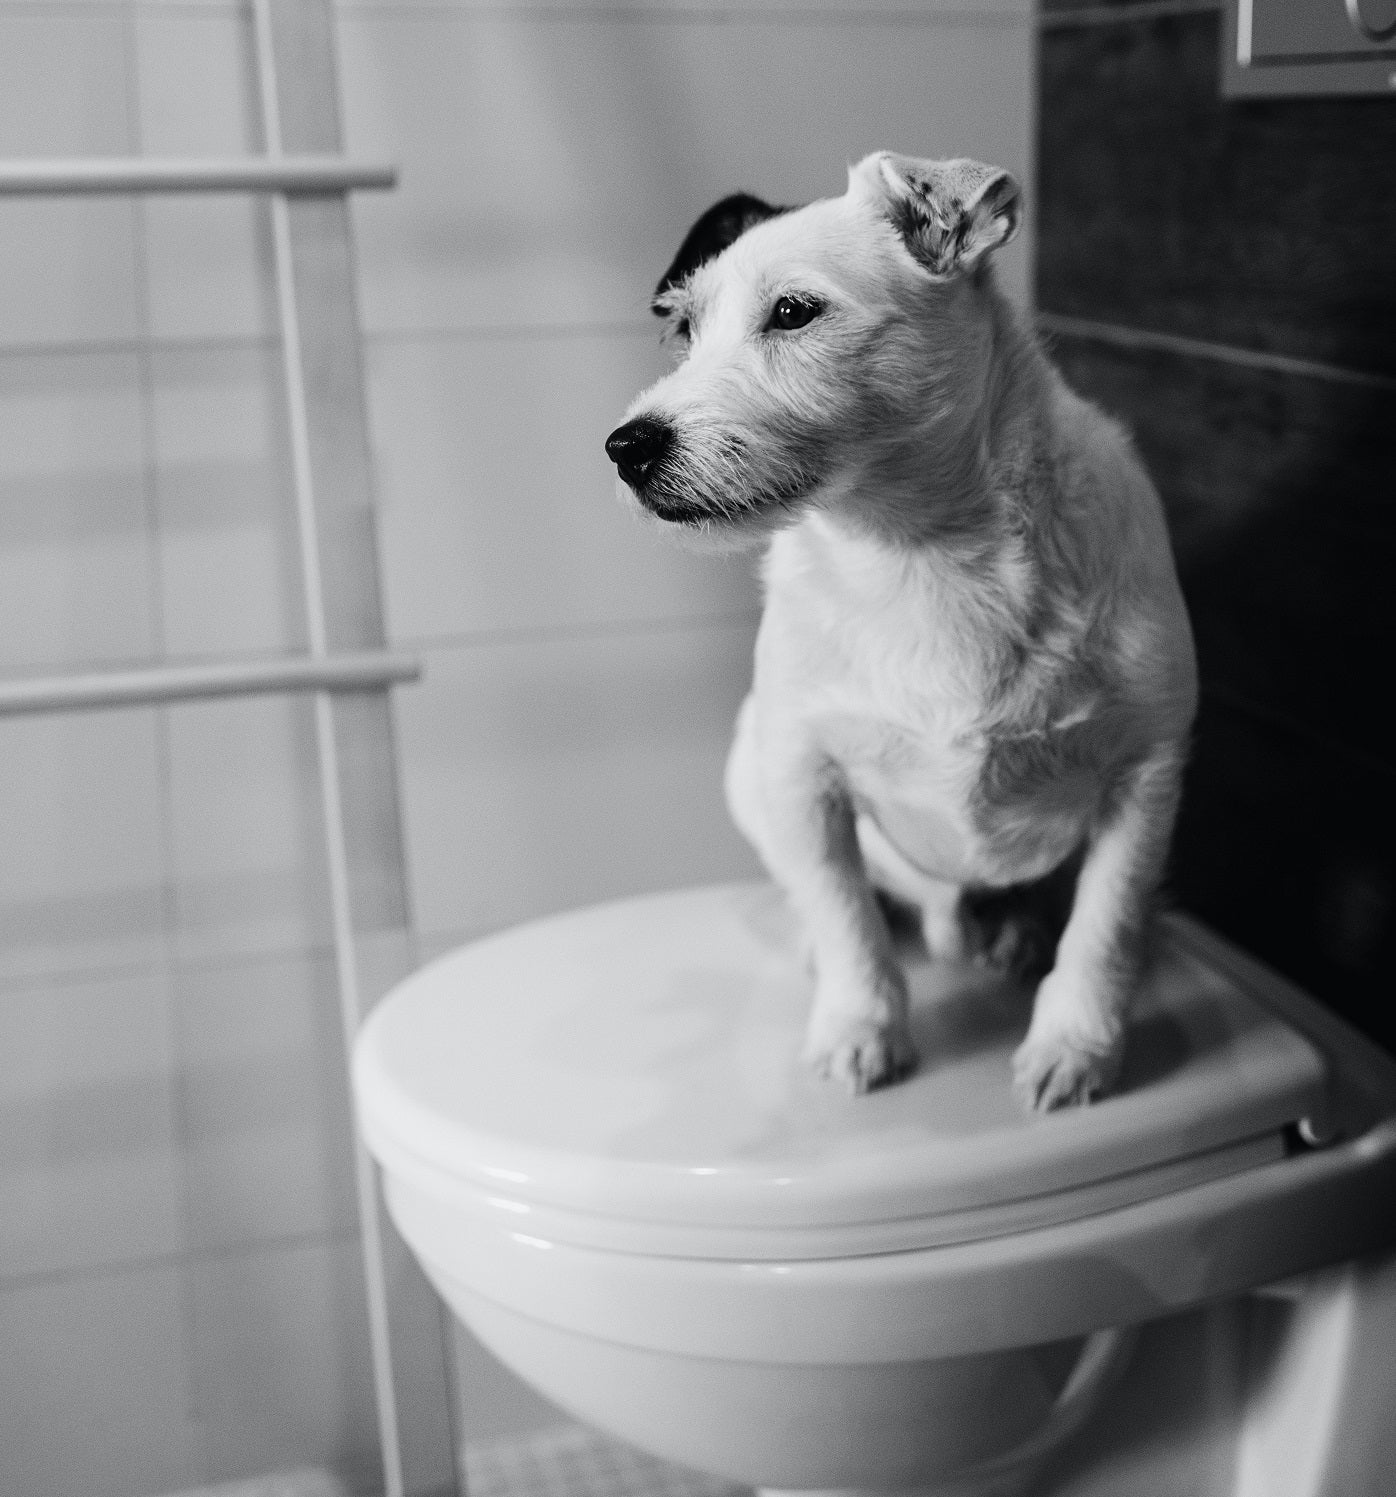 Can You Flush Dog and Cat Poo Down the Toilet?